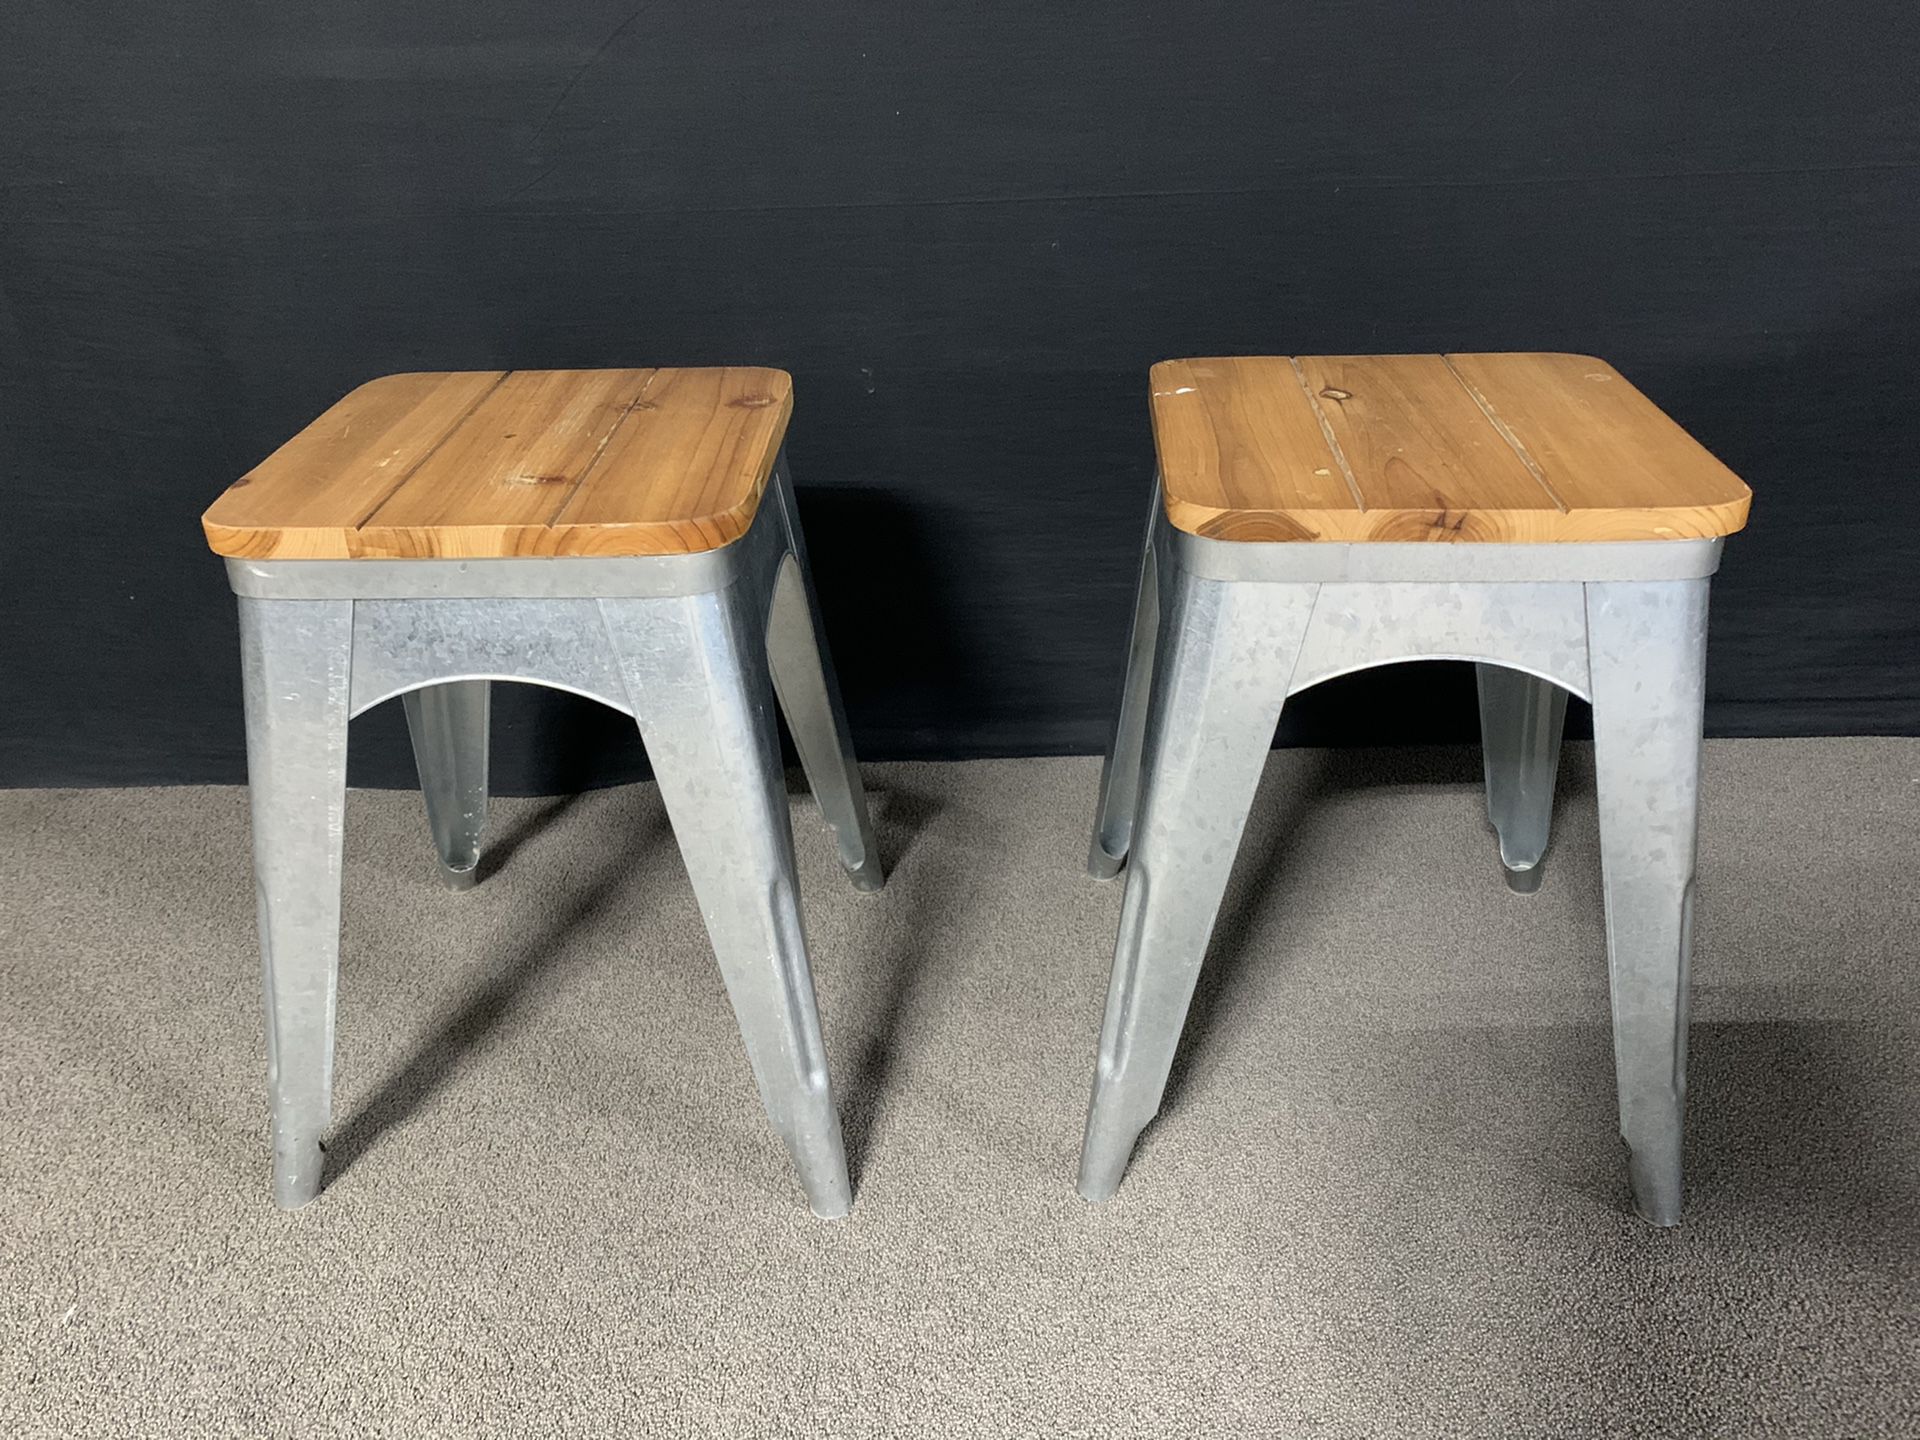 End tables/small stools